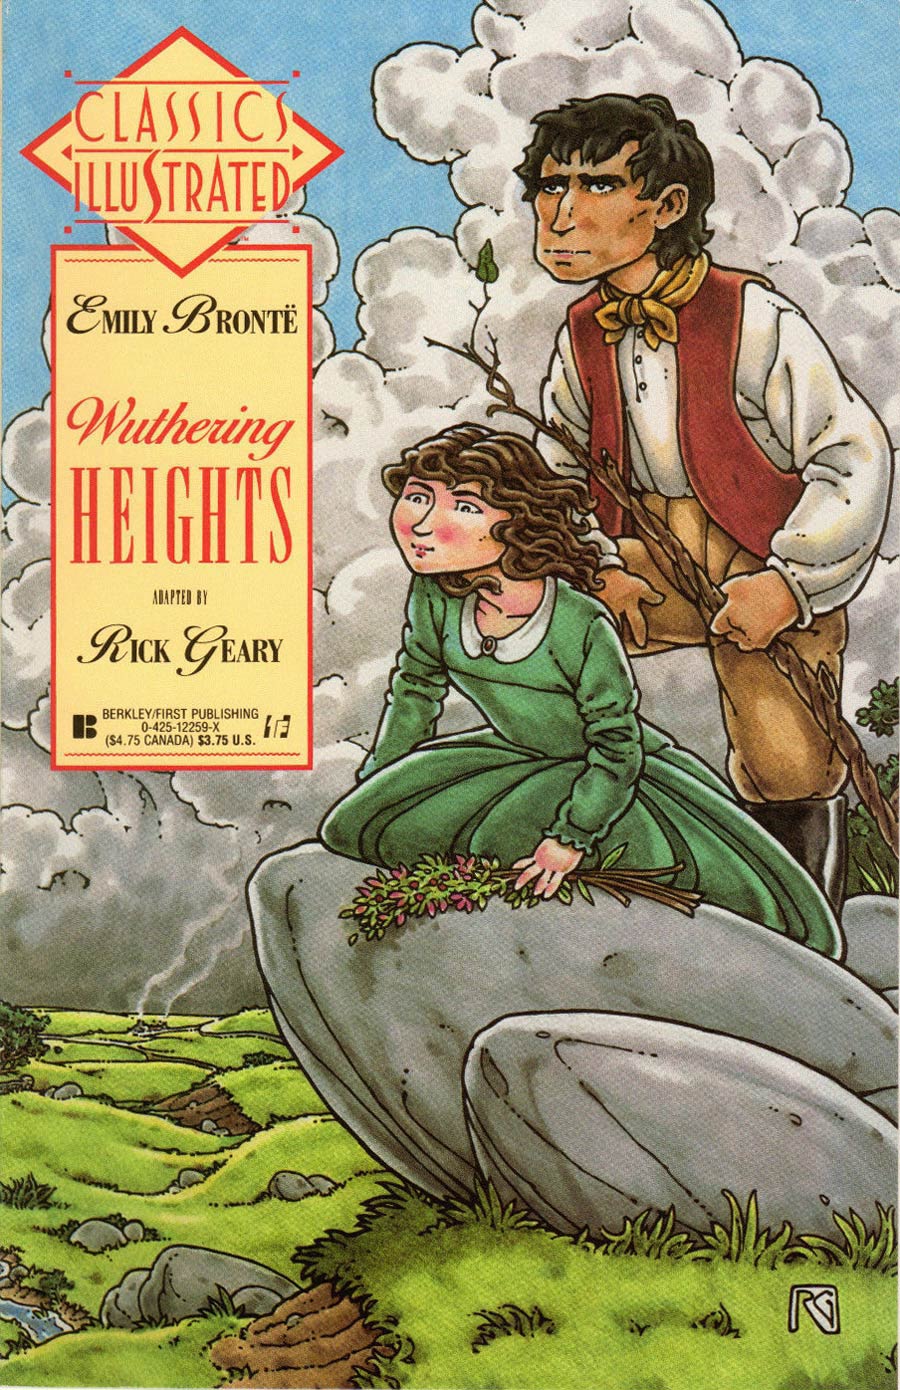 Classics Illustrated Vol 2 #13 Wuthering Heights